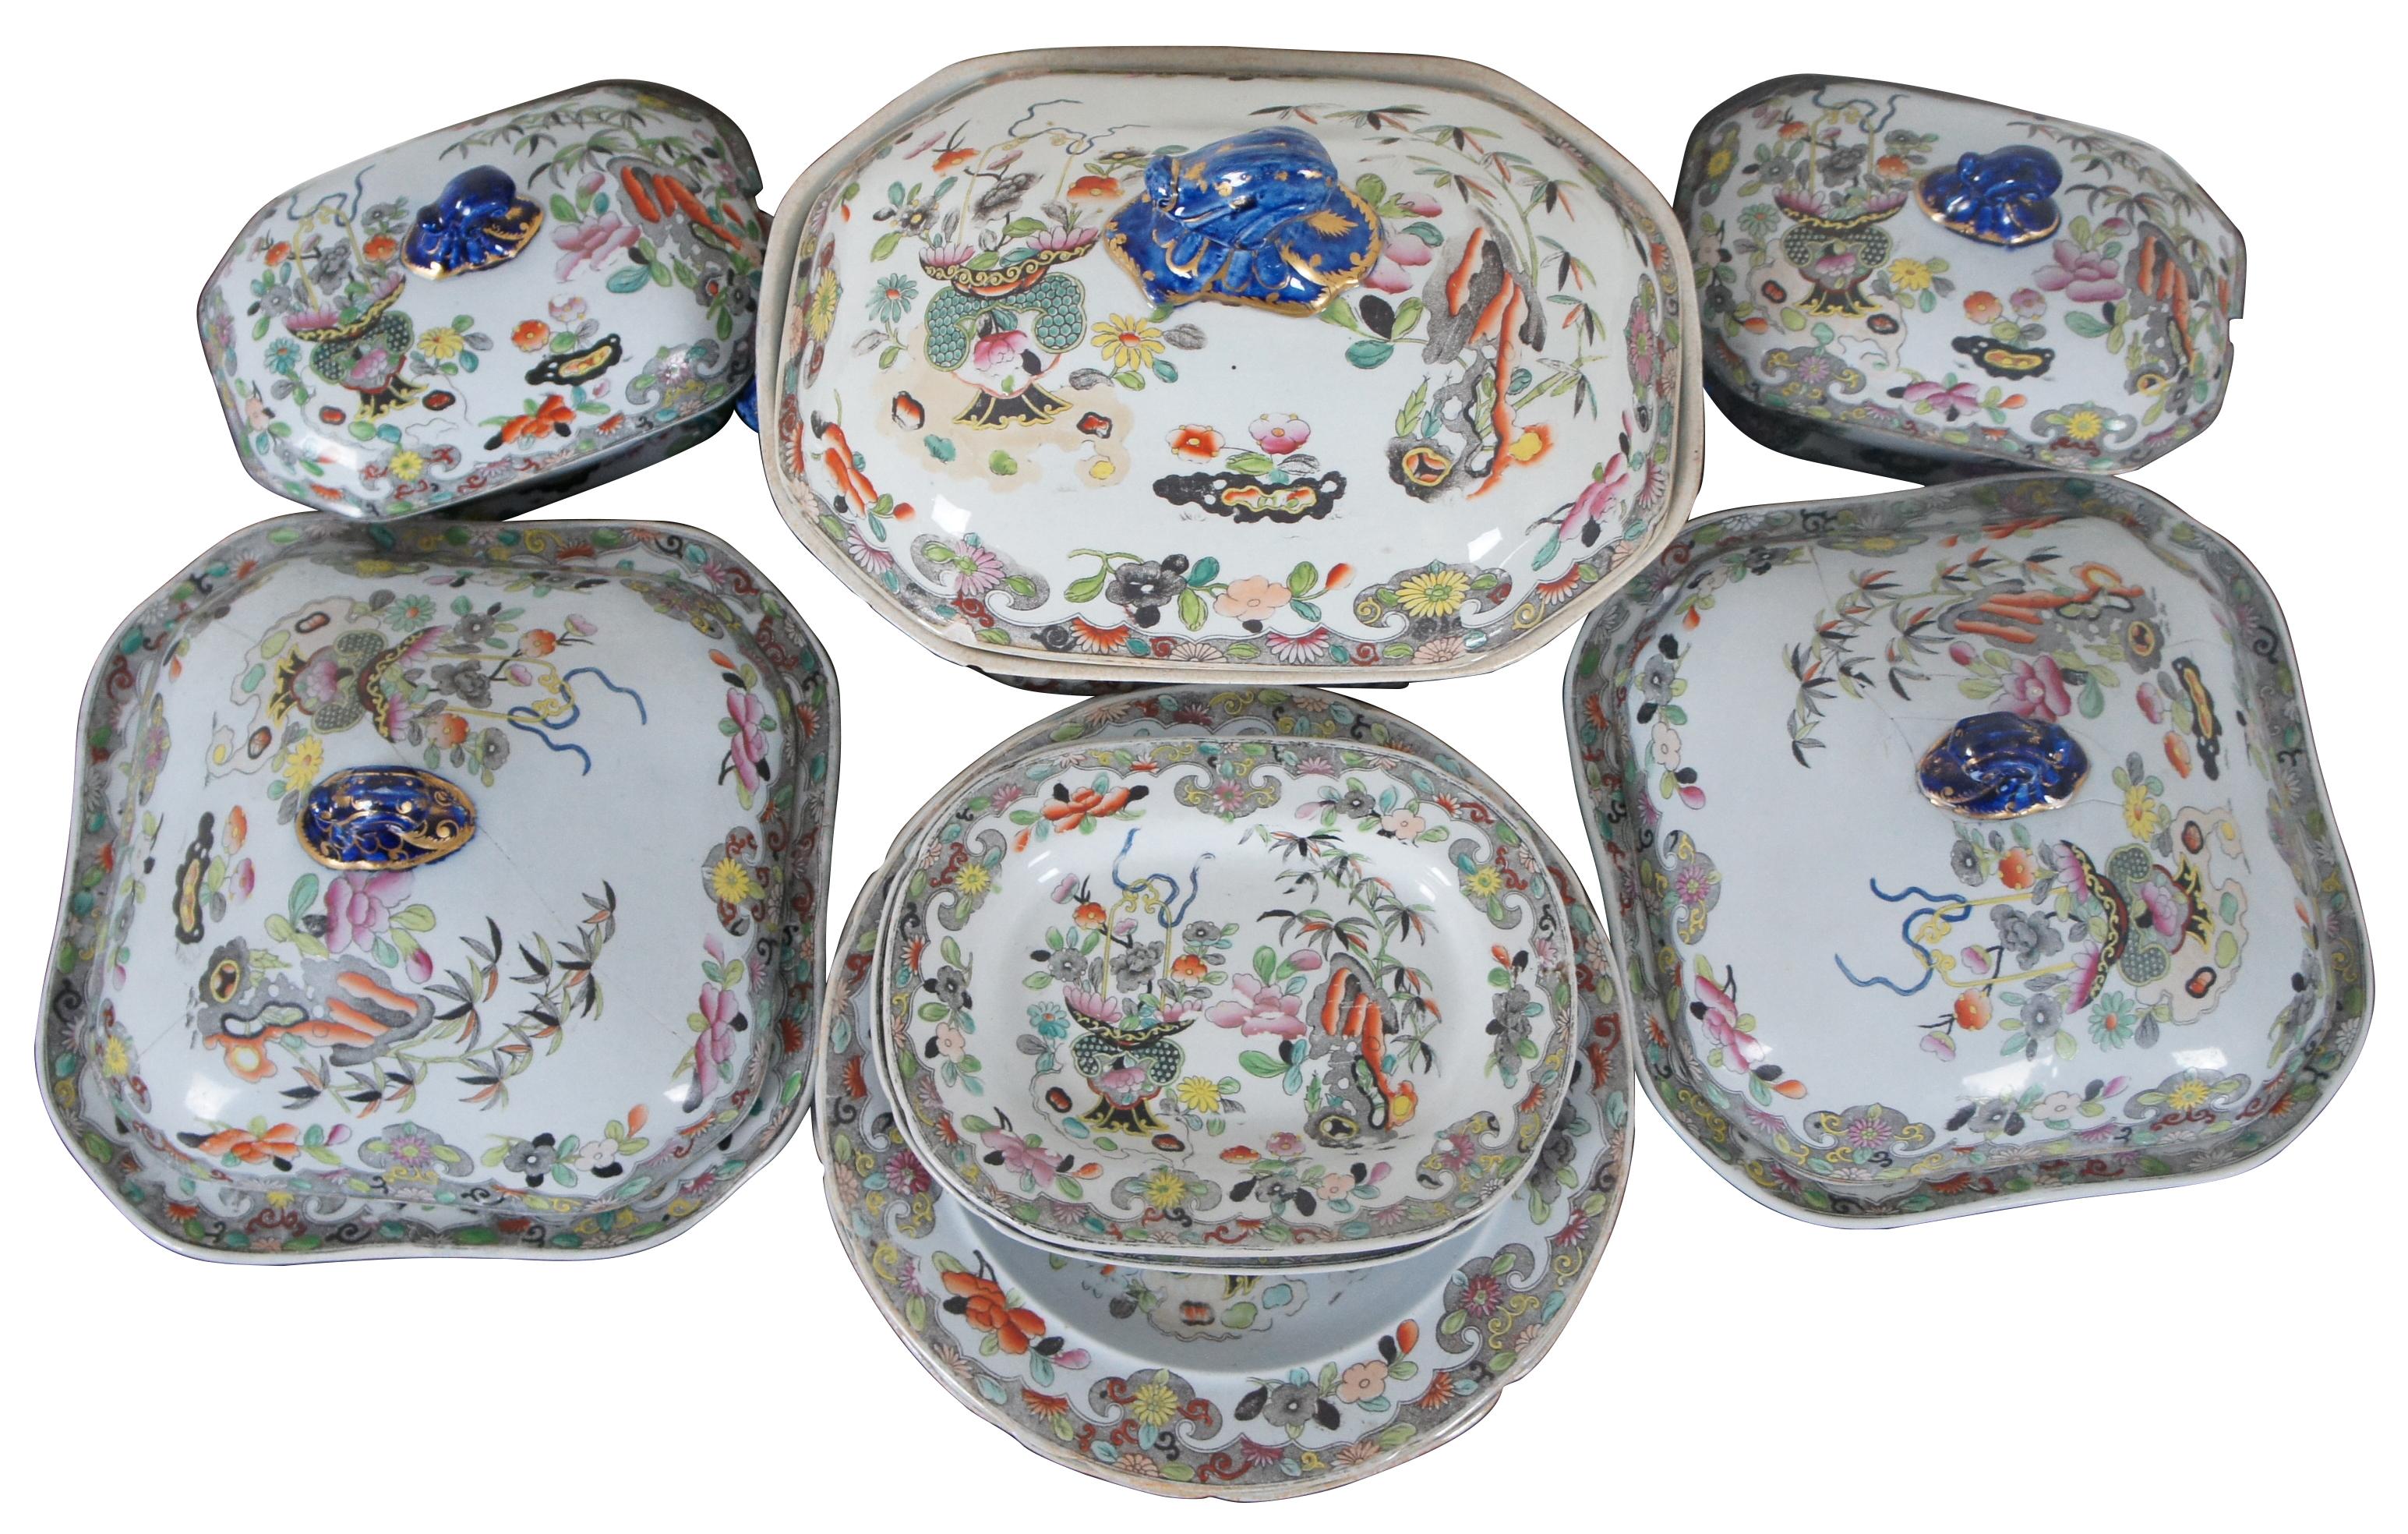 Circa 1820 Stephen Folch dinner set in Bamboo & Basket pattern with Royal Arms mark, Circa 1825

Each piece has a light grey-blue glaze and has been beautifully and carefully hand-painted in a chinoiserie pattern in bold colorful enamels over a